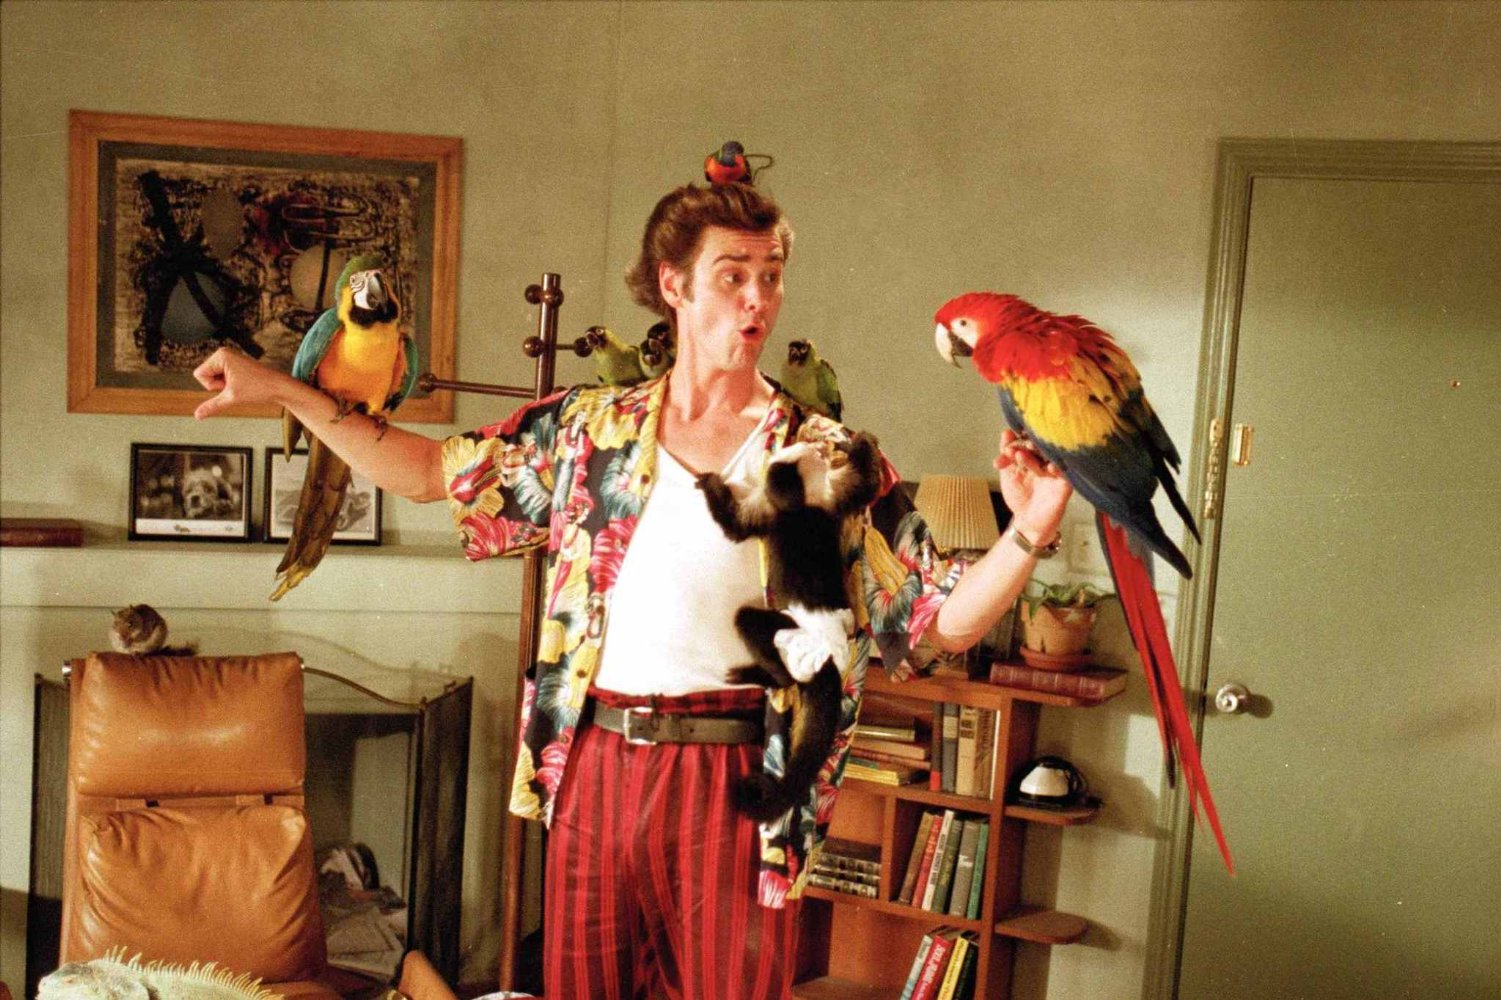 vandring fordøje Brawl Watch Movies and TV Shows with character Ace Ventura for free! List of  Movies: Ace Ventura When Nature Calls, Ace Ventura: Pet Detective